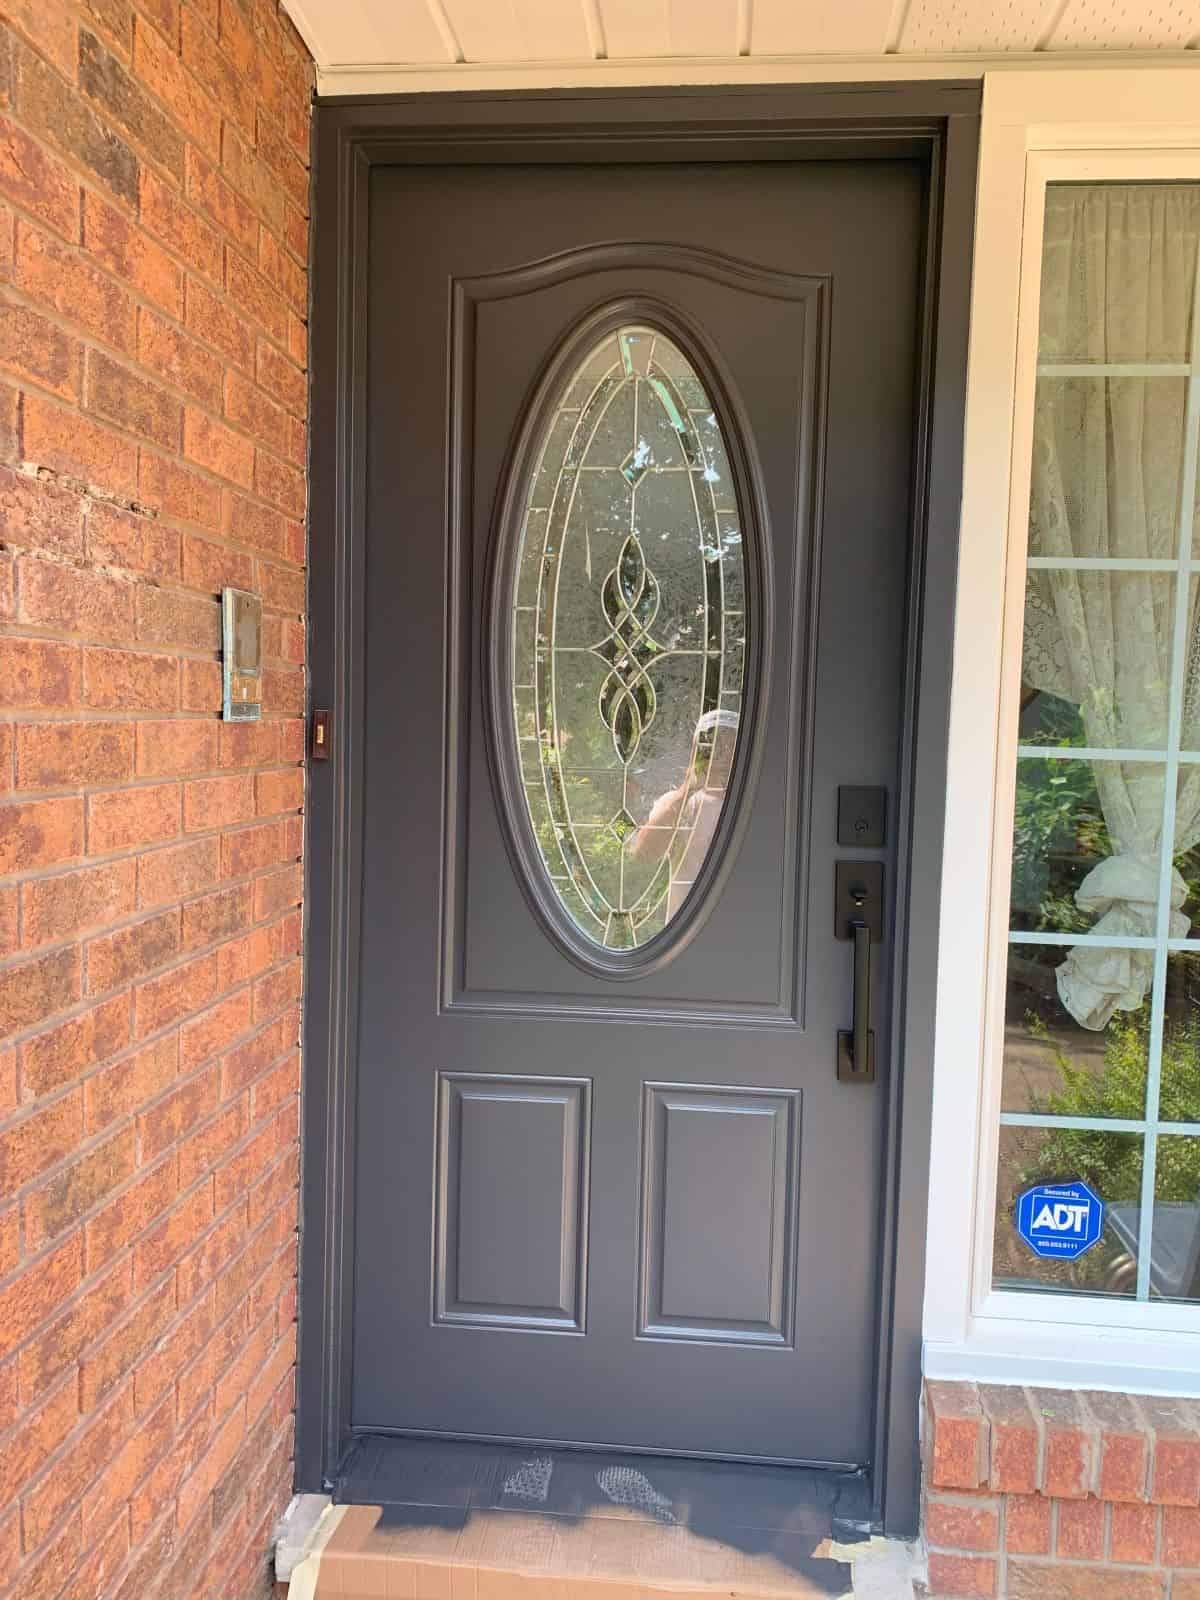 perfect finish on a front door recently painted dark brown by a spray painter.